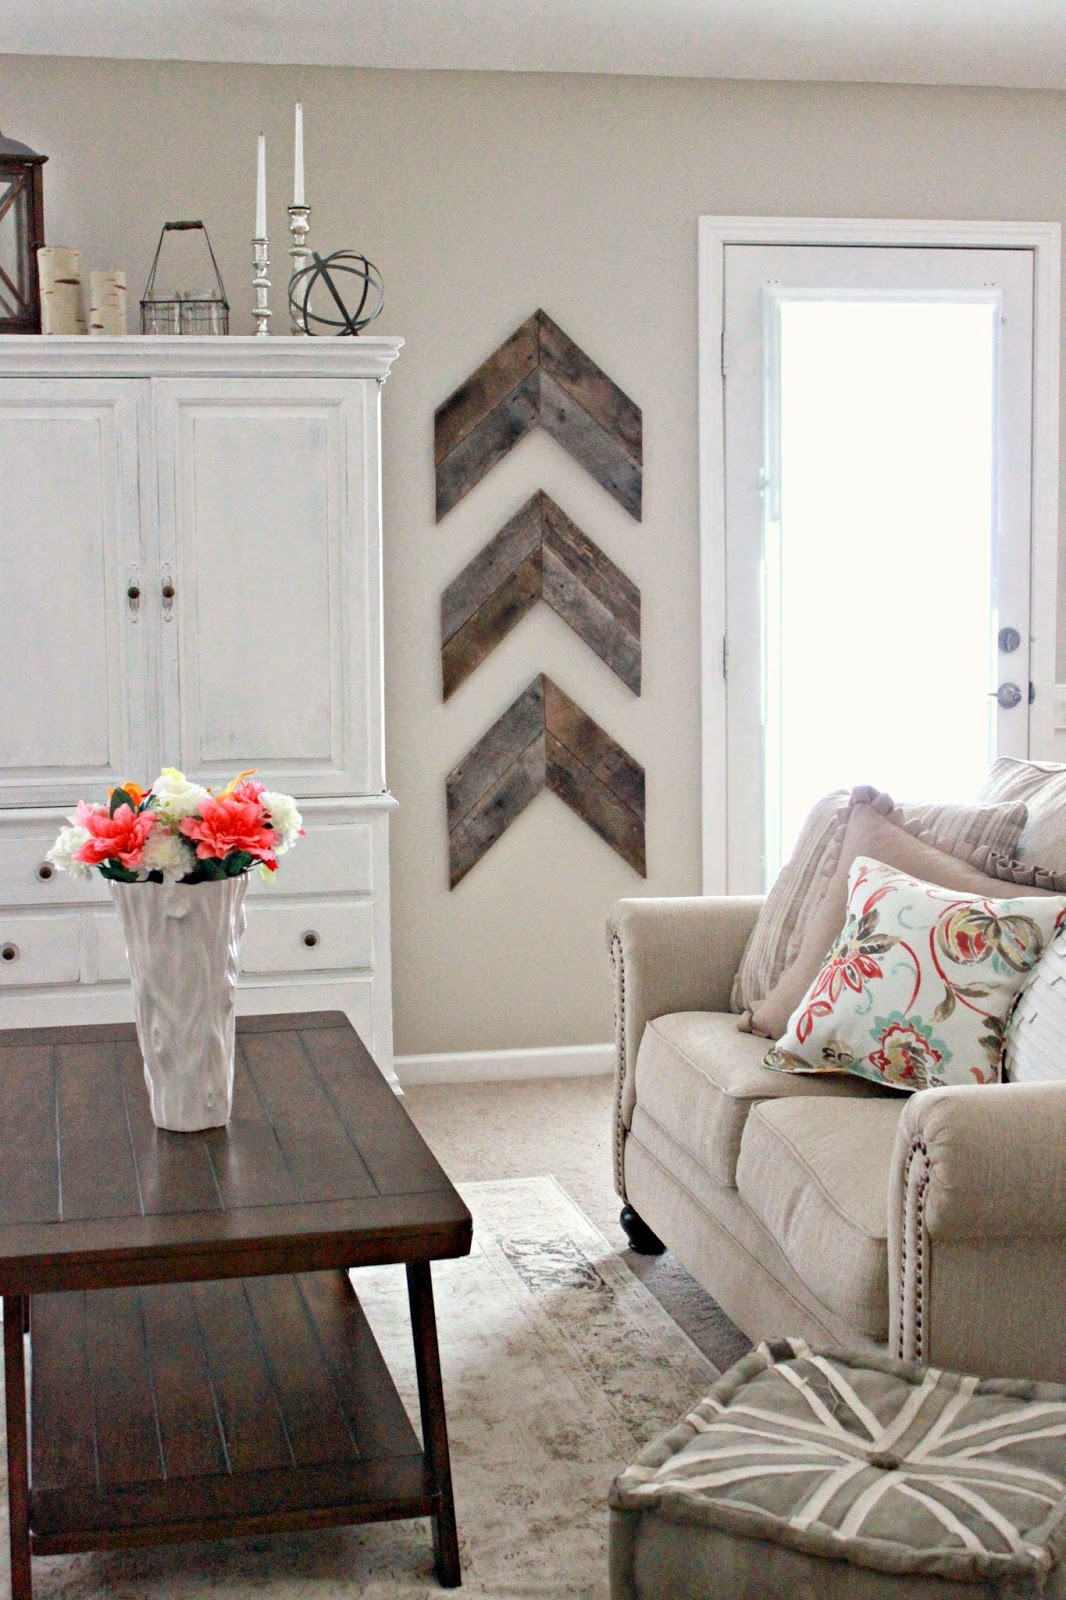 Wall Pieces For Living Room
 15 Striking Ways to Decorate with Arrows